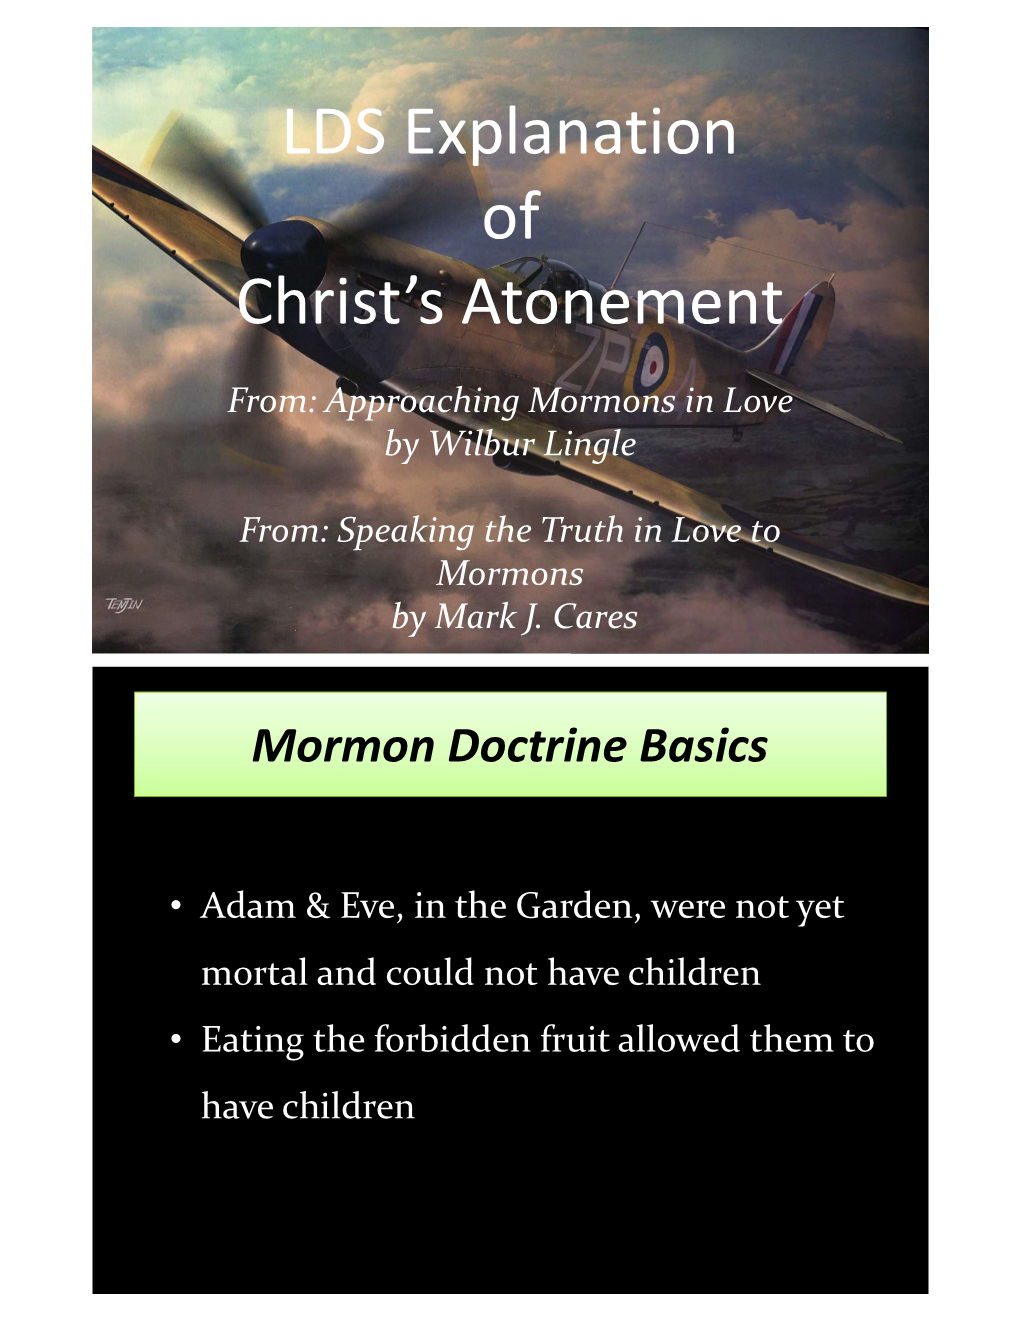 LDS Explanation of Christ's Atonement